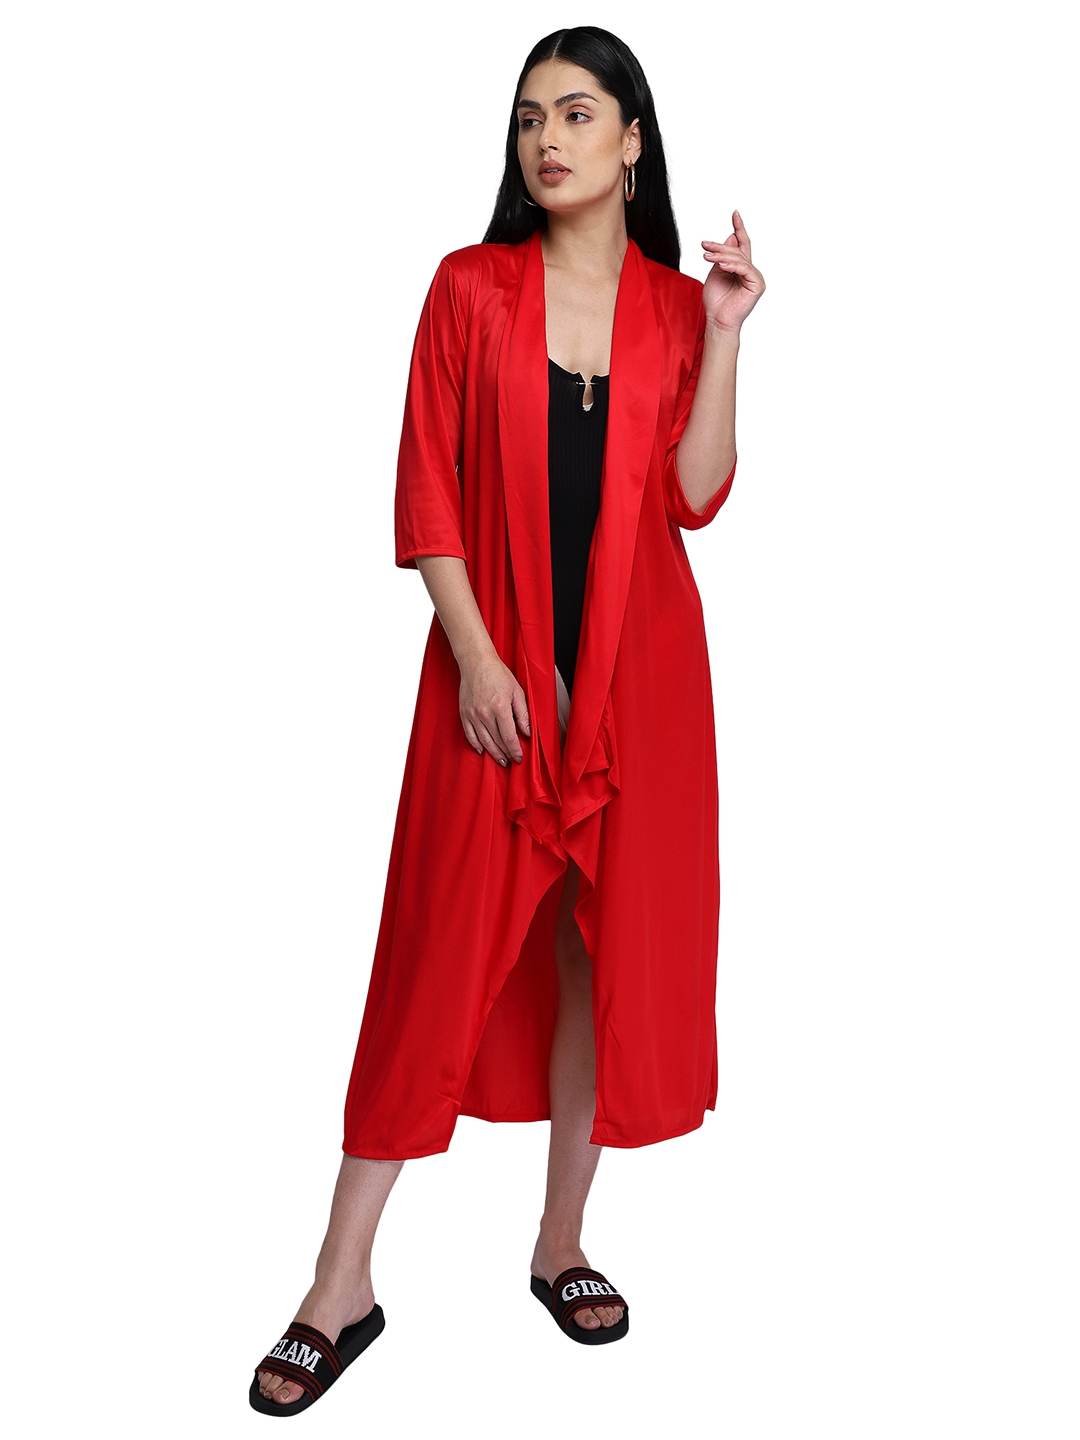 Smarty Pants | Smarty Pants women's solid red color cape cover up